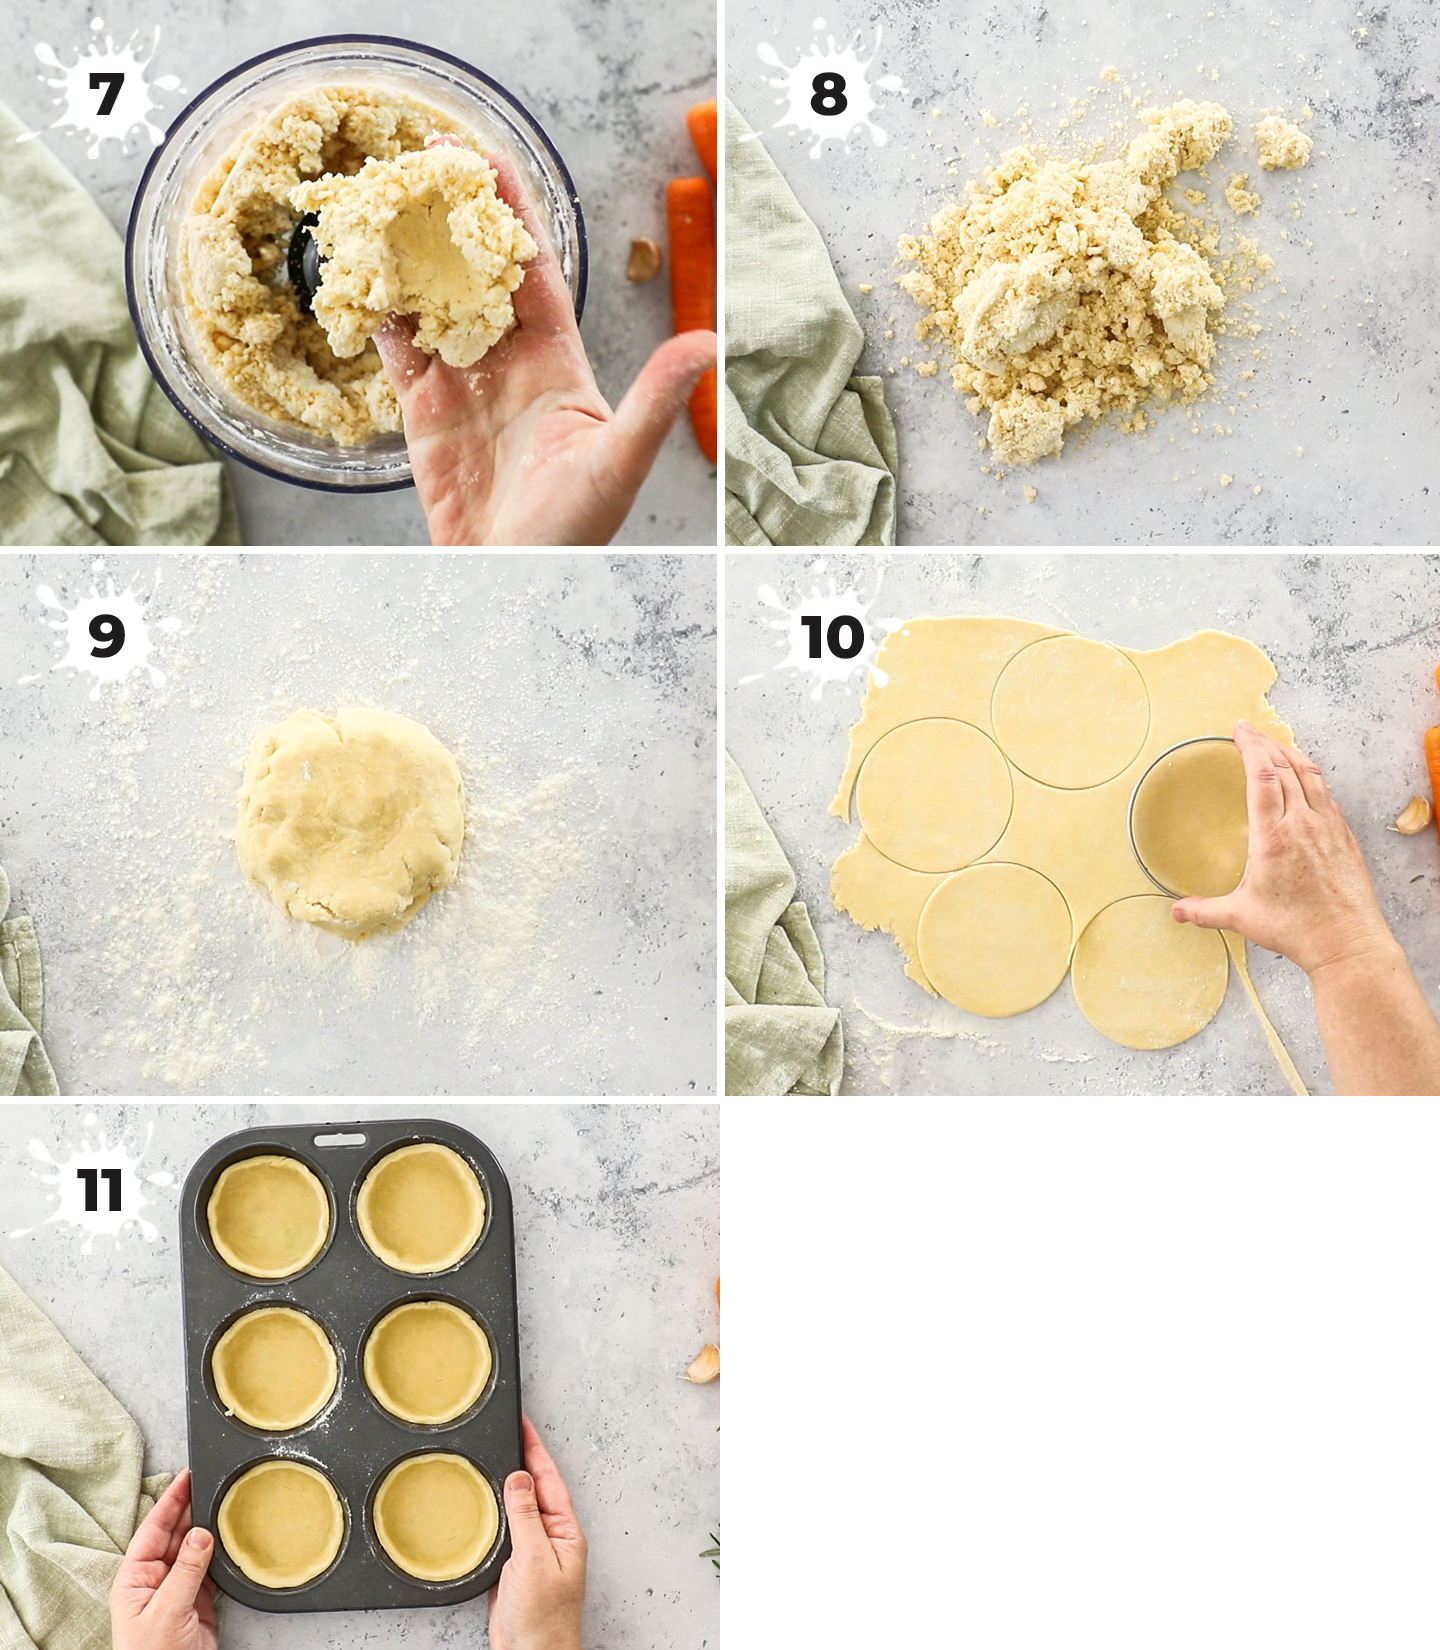 A collage showing how to make the pastry.